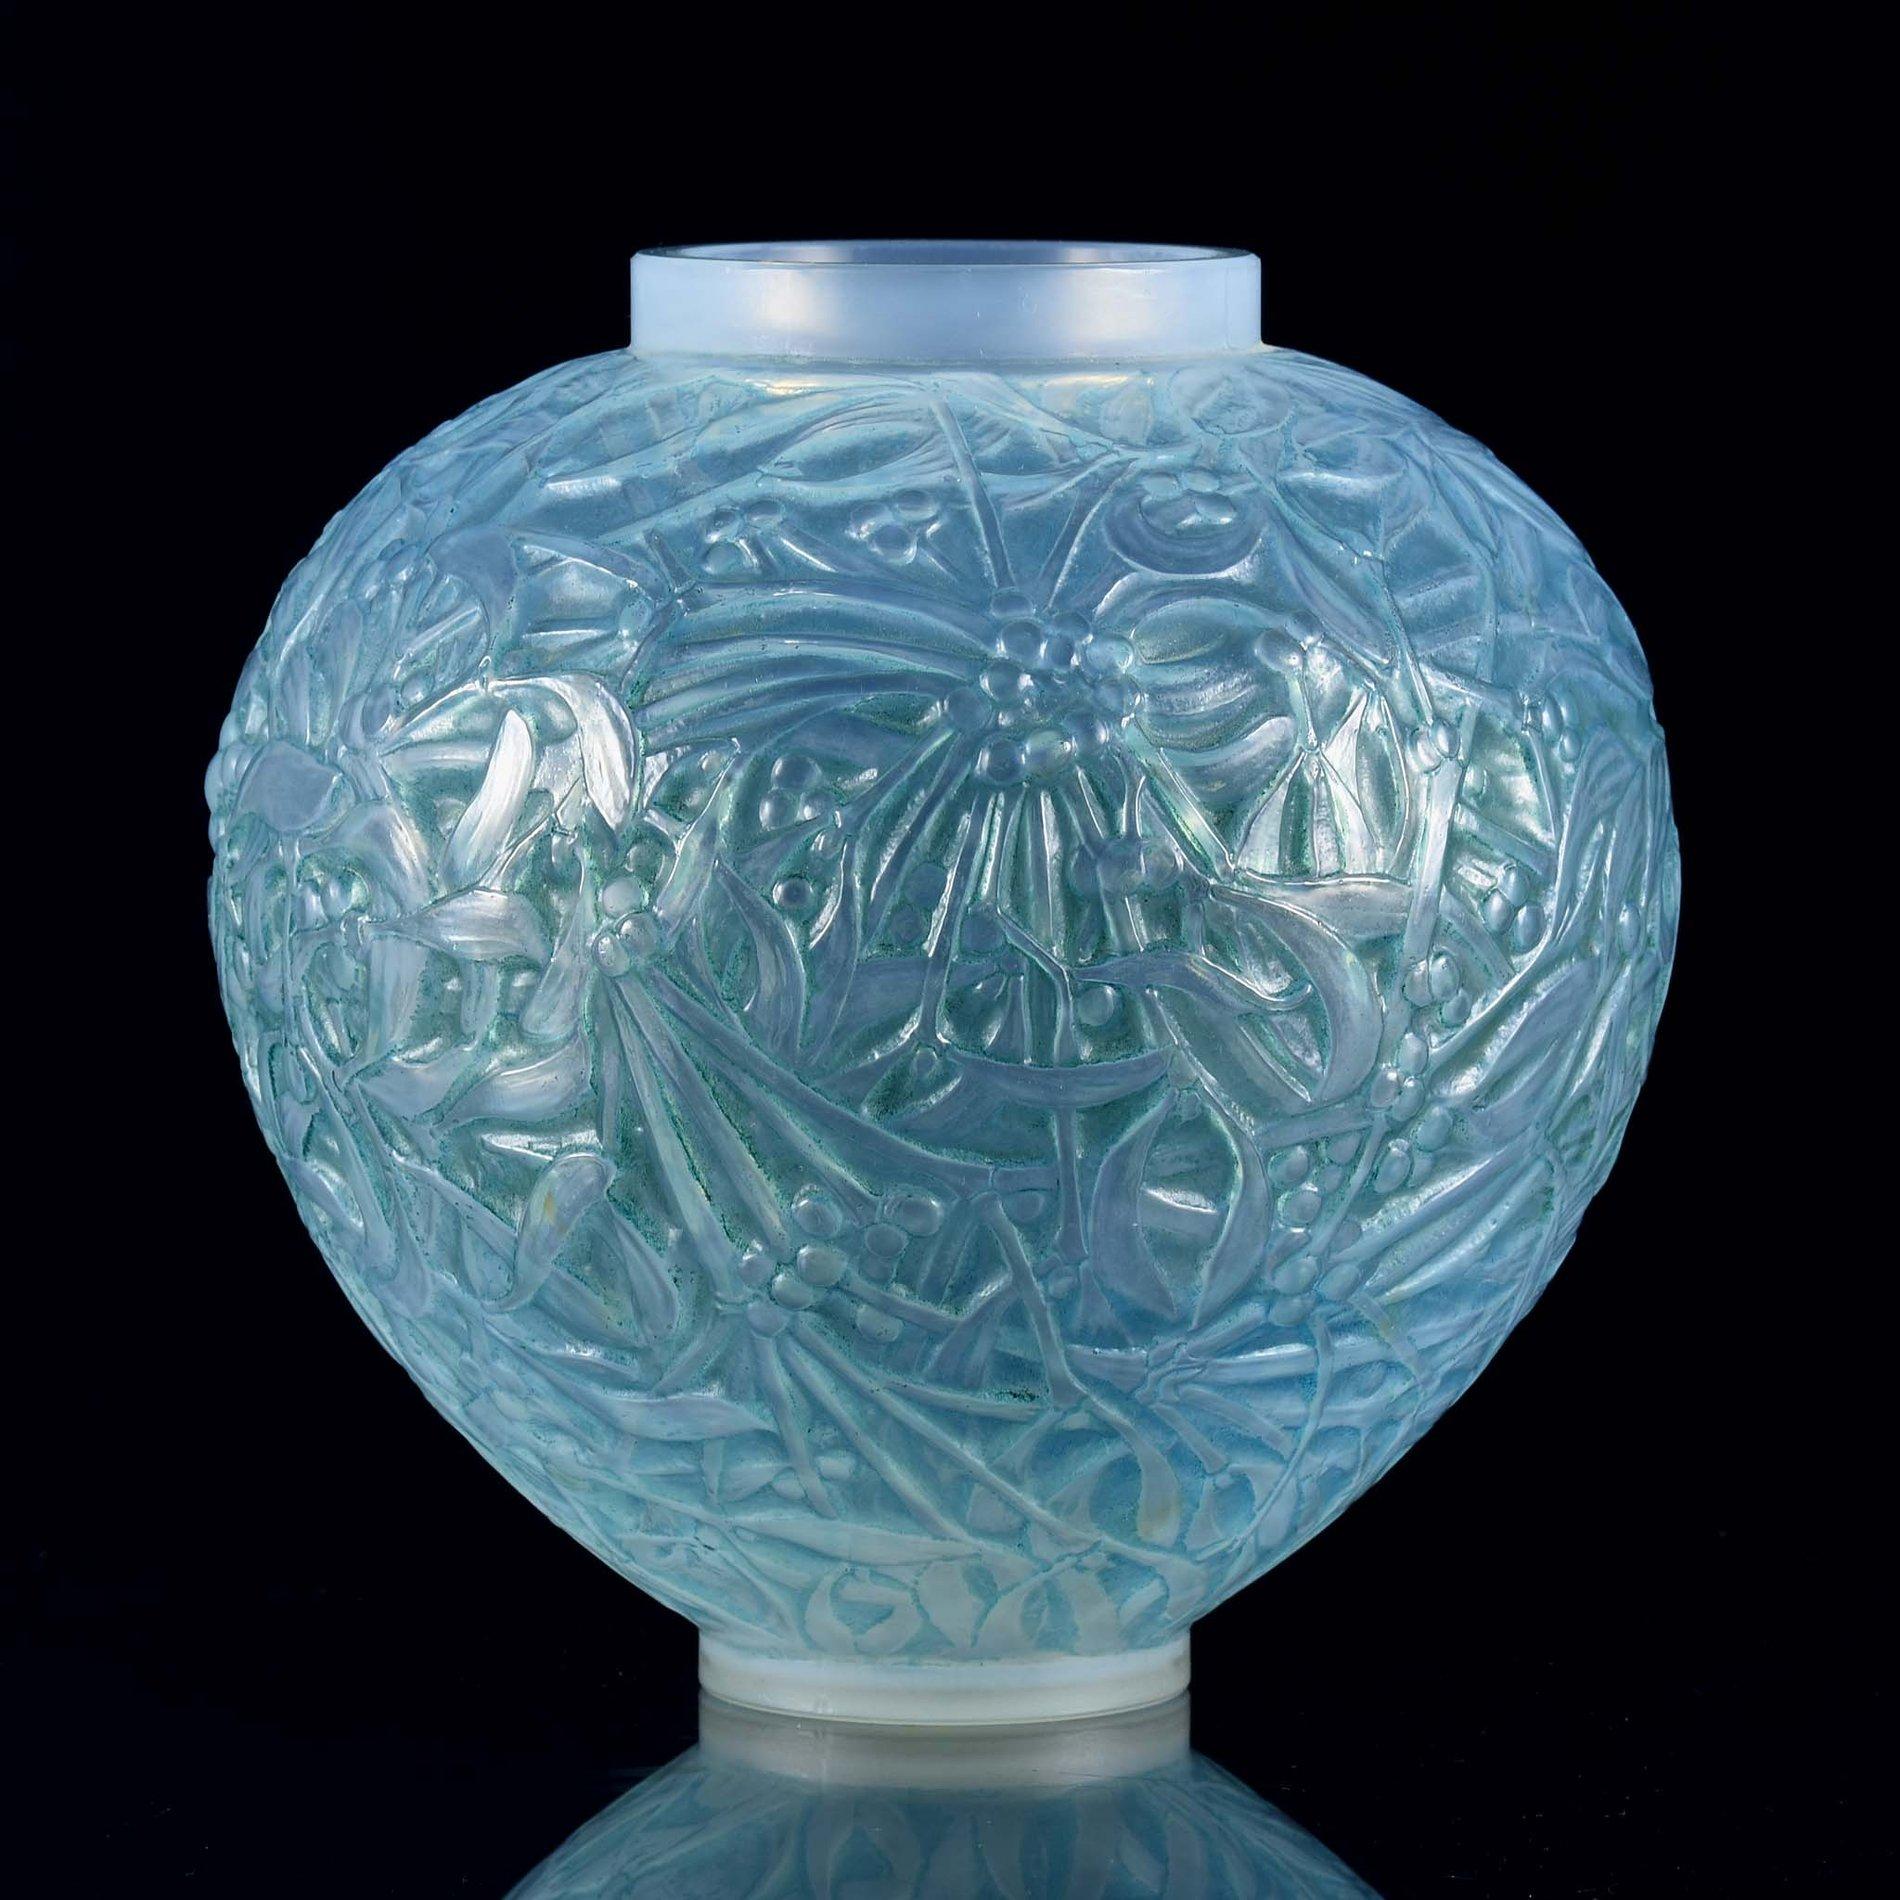 An attractive early 20th century French opalescent glass vase decorated with fruiting mistletoe around the circumference of the vase, with deep sky blue color highlighted with turquoise staining and fine detail, signed R Lalique

Vase